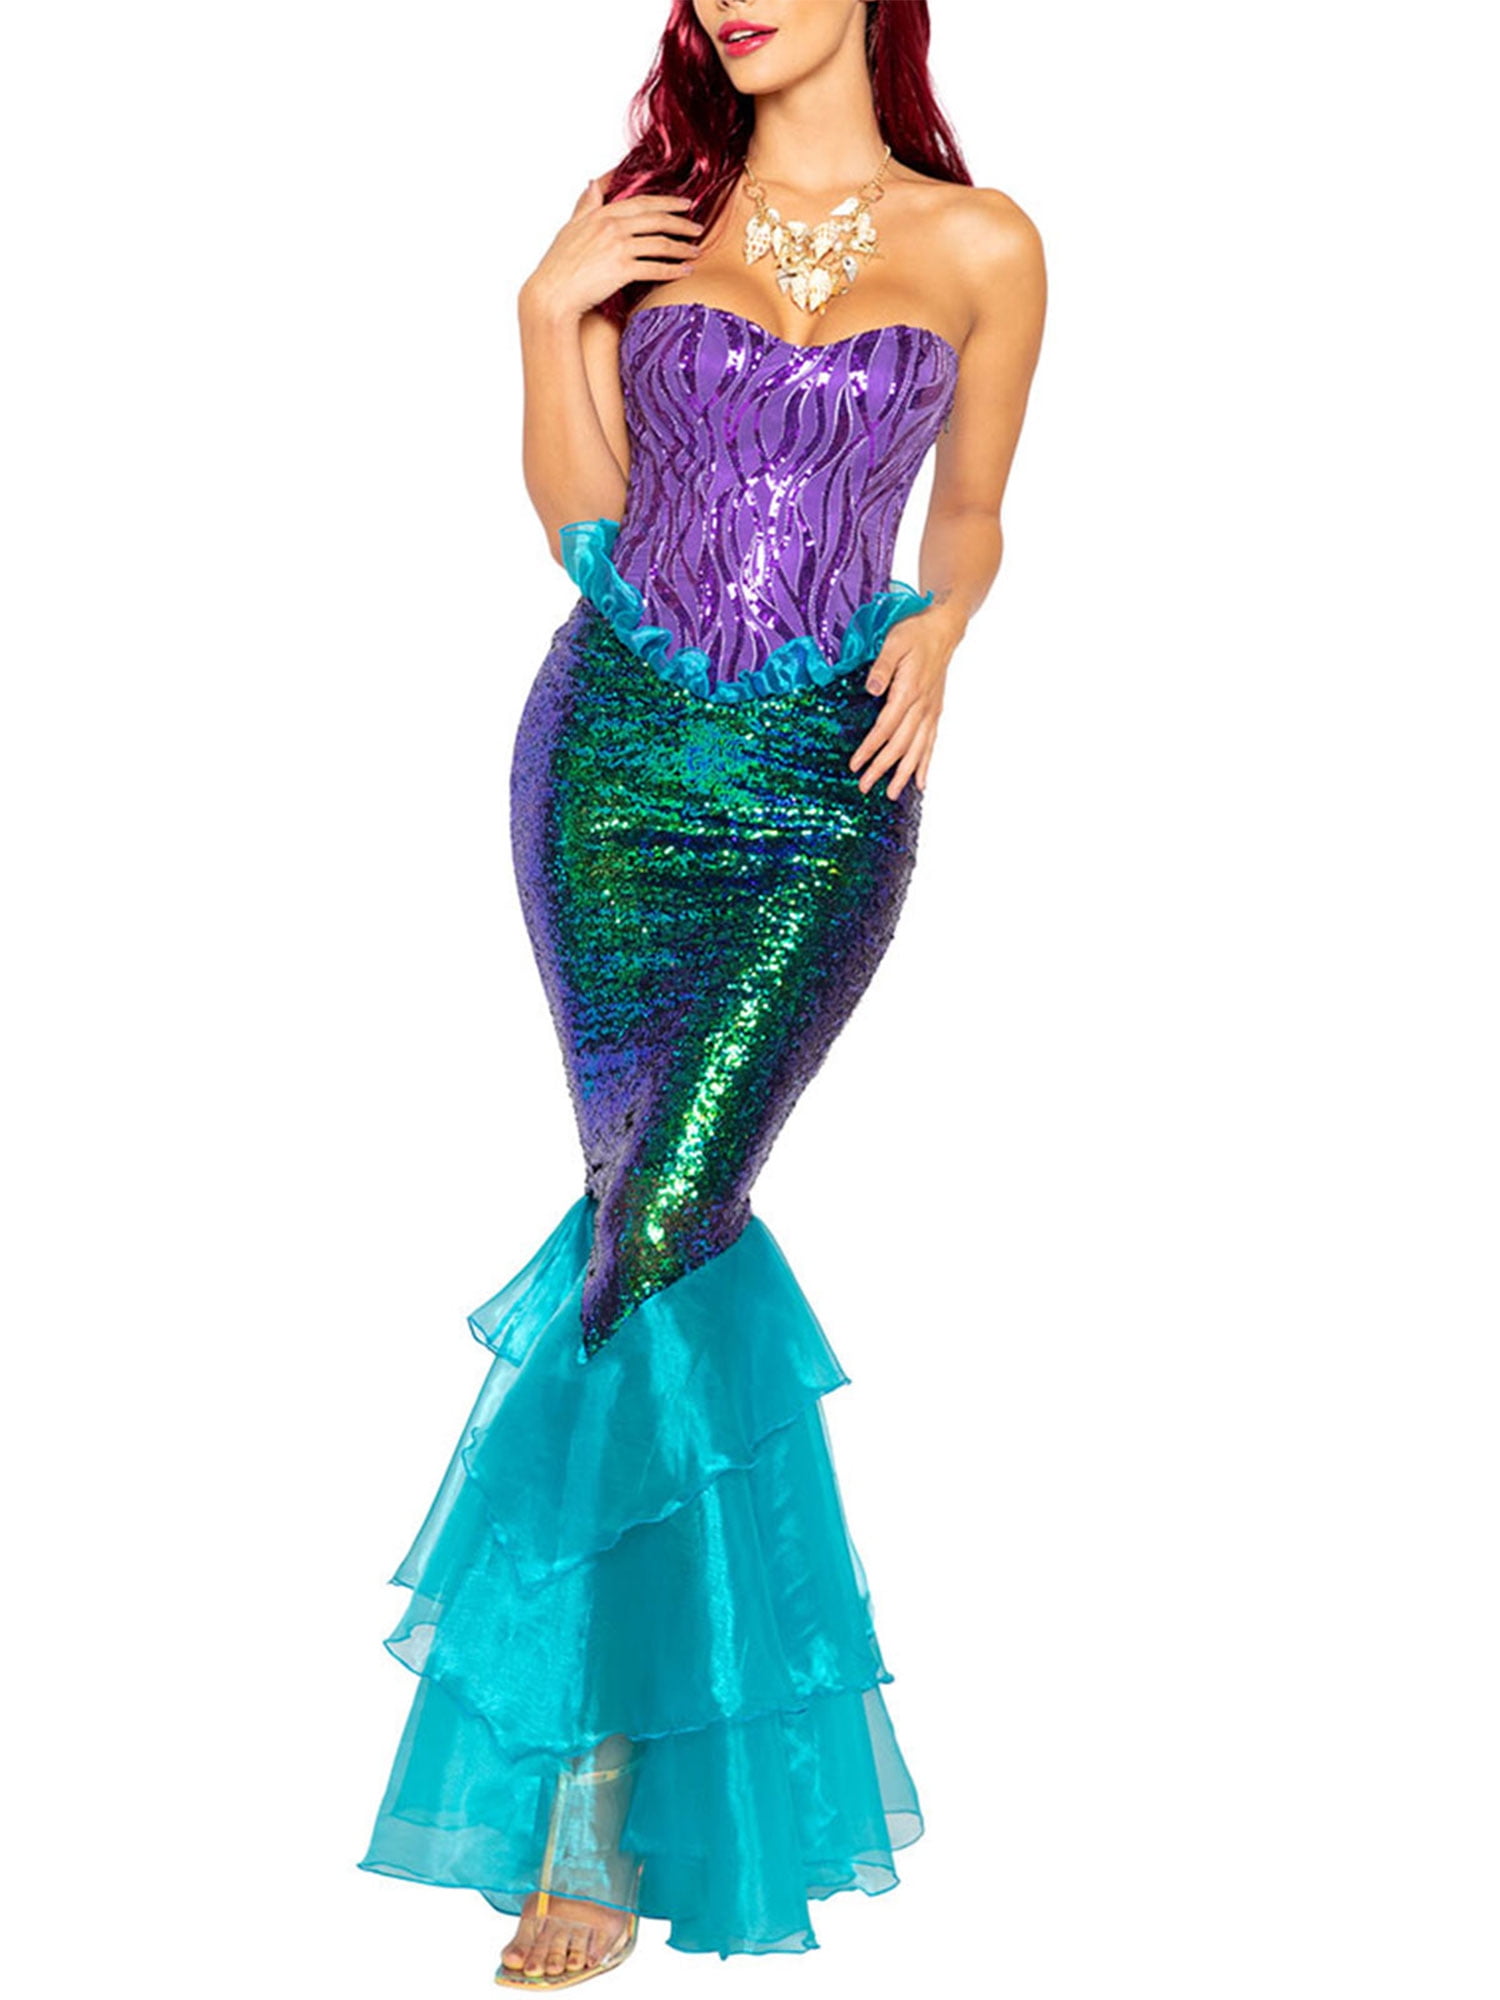 Womens Mermaid Costume Cosplay Halloween Party Sequined Long Dress Tail Skirt